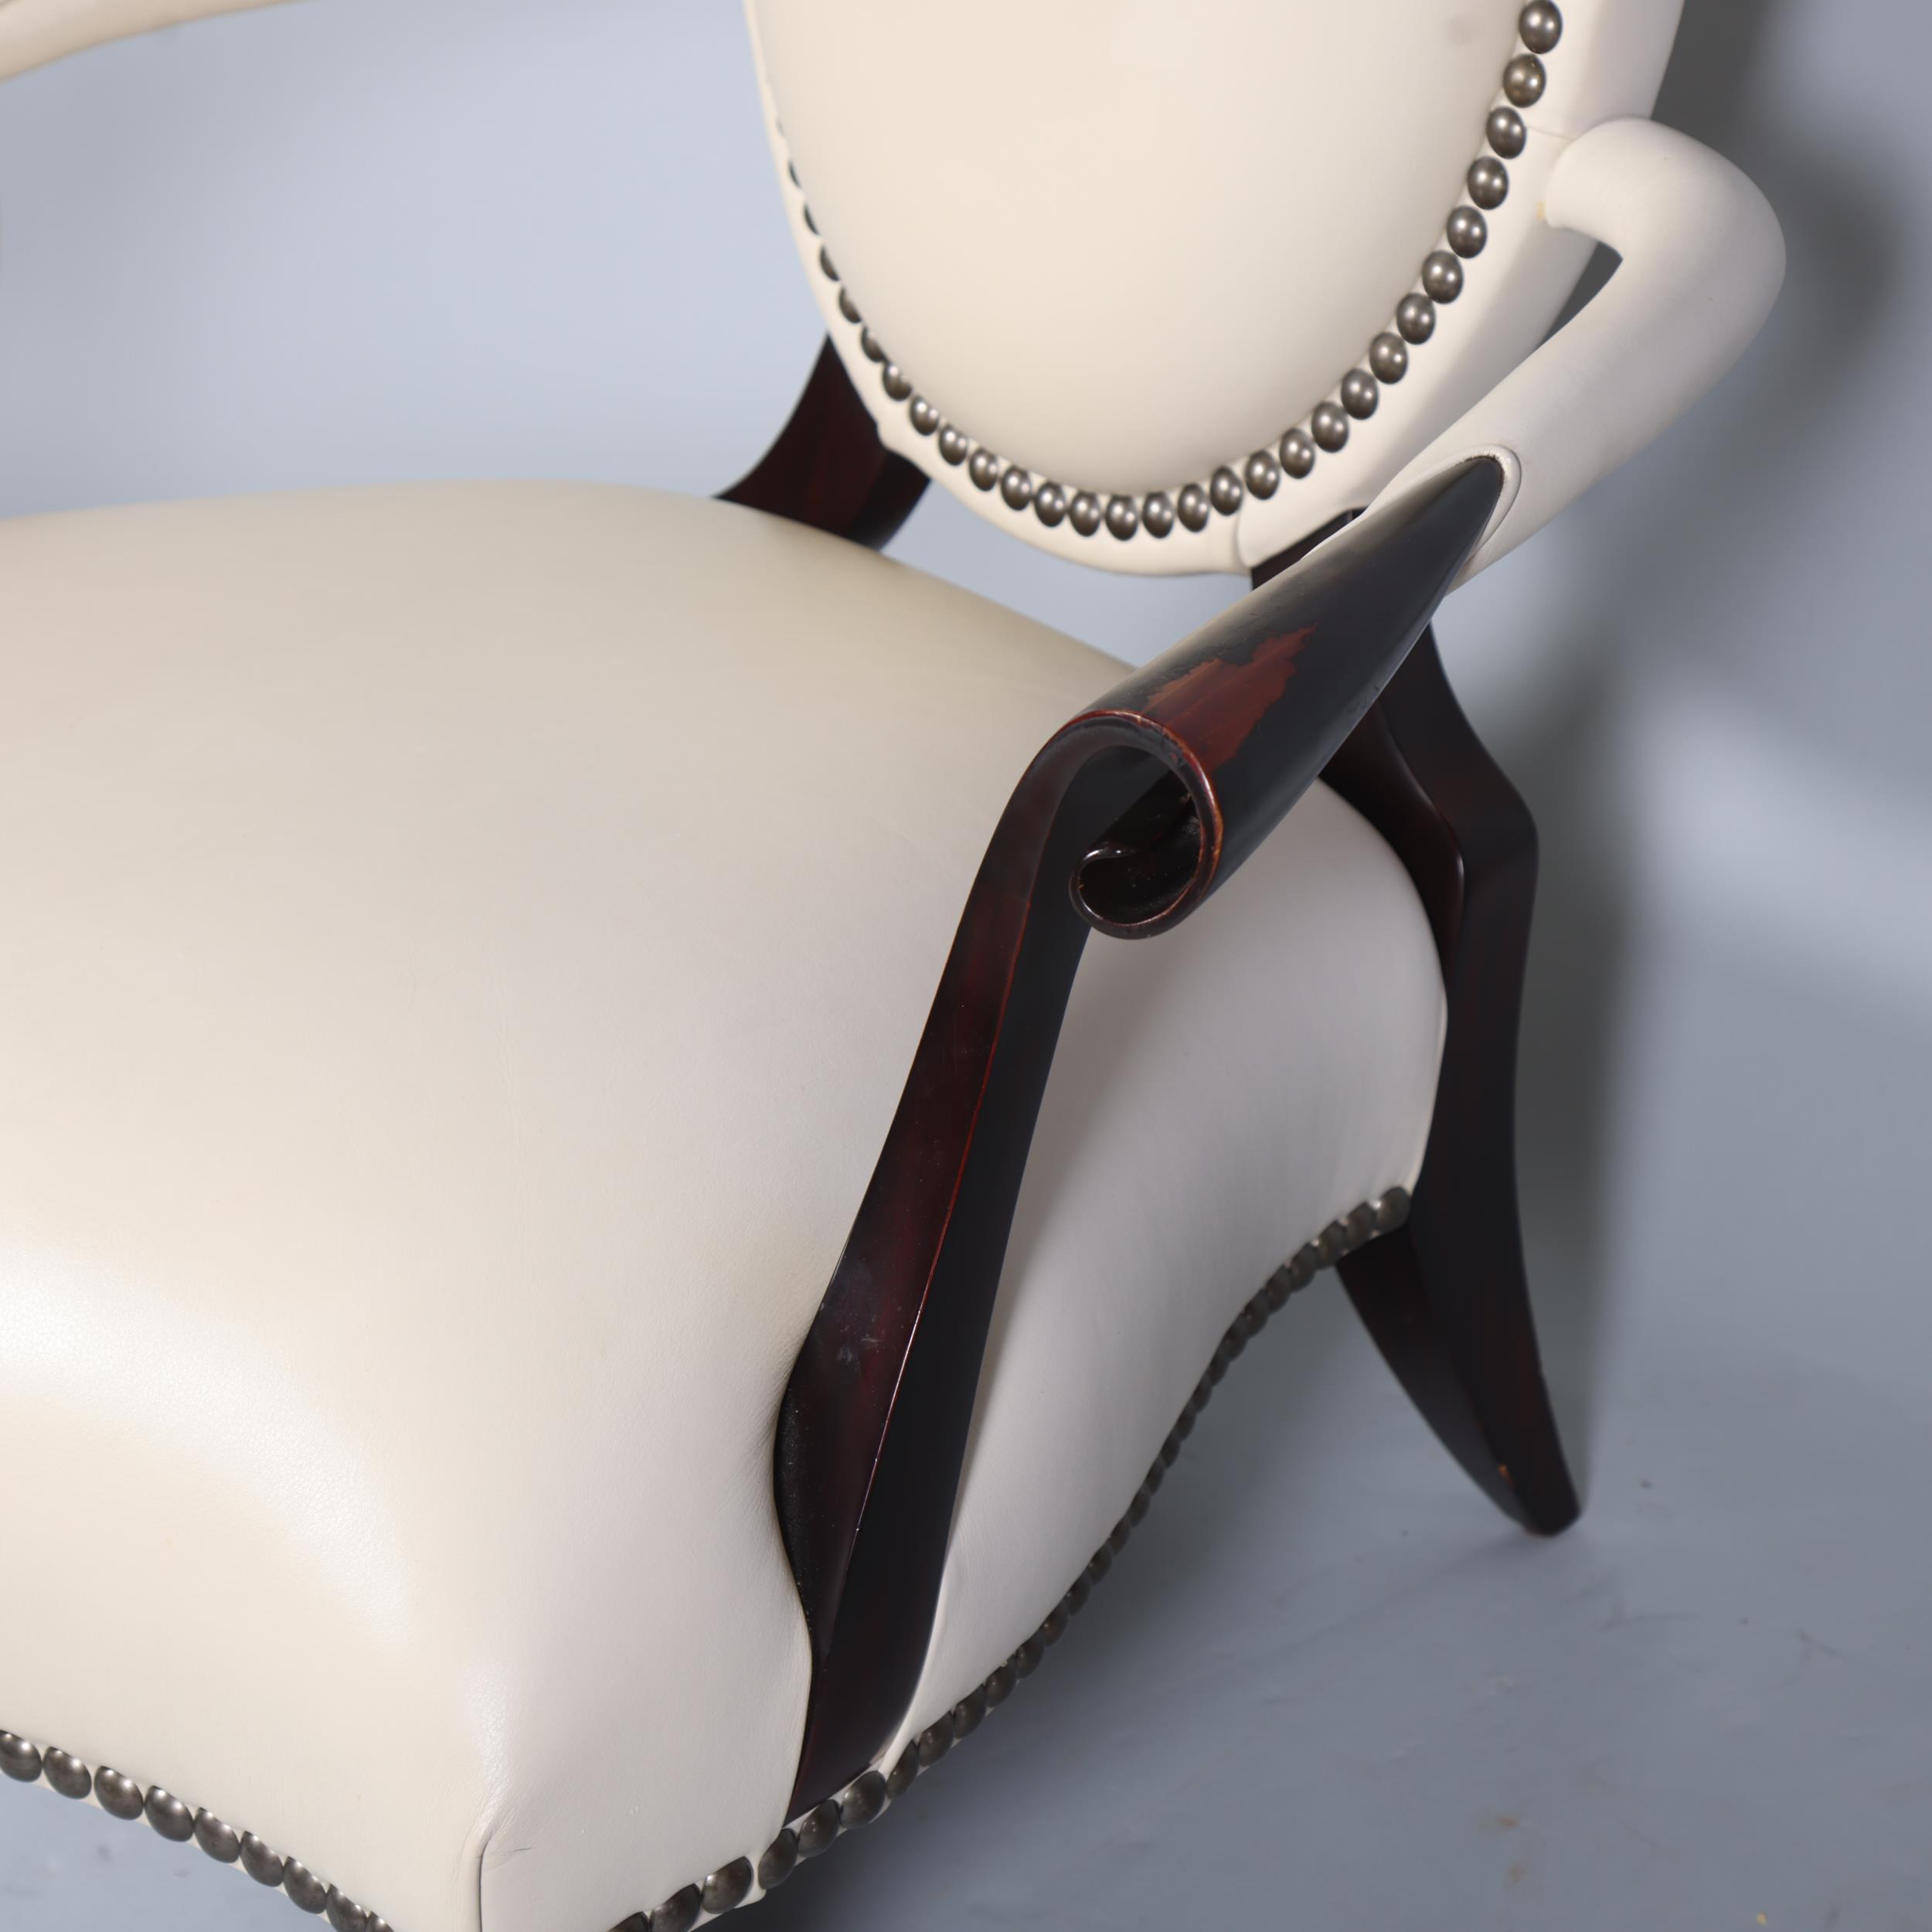 A Christopher Guy salon chair, white studded leather upholstery with back slit to reveal red - Image 2 of 5